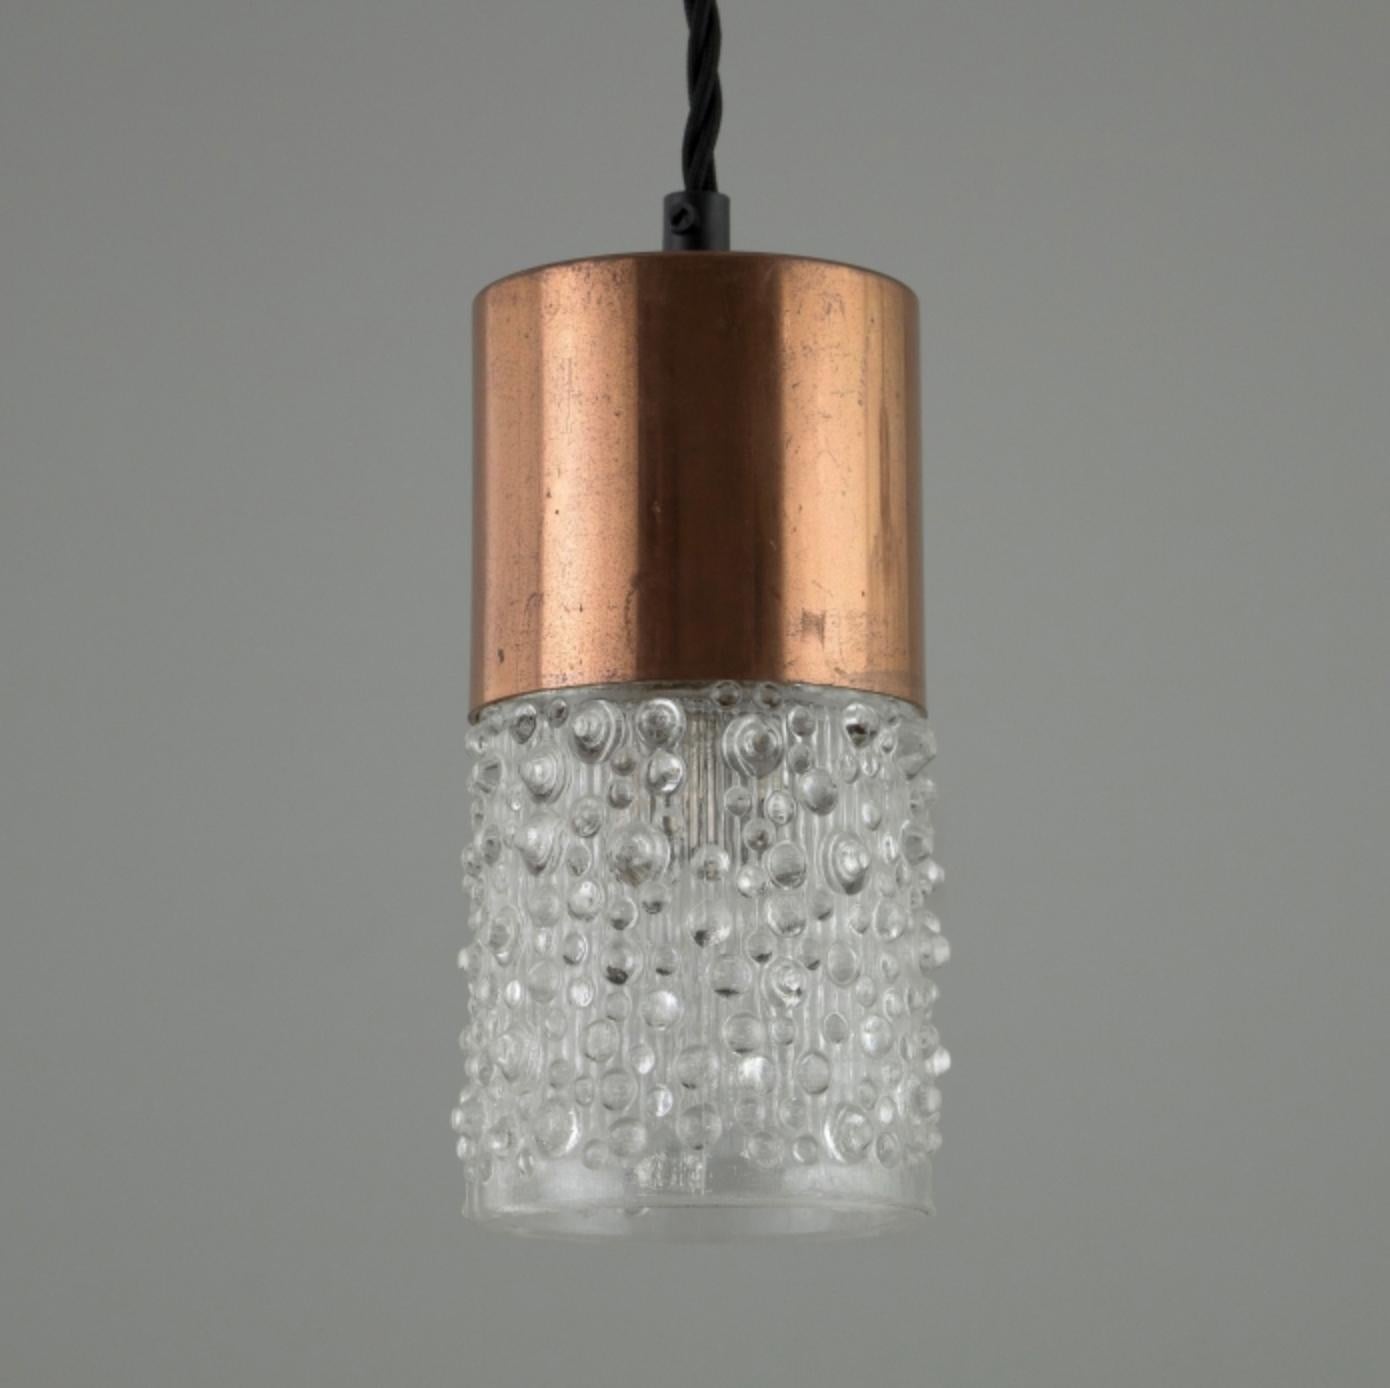 Large set stylish German pendants originally made in the 1960s. With a molded, open-bottomed glass shade and a copper plated/thermoplastic gallery. The contrasting glass and copper would make these lights a striking feature in any